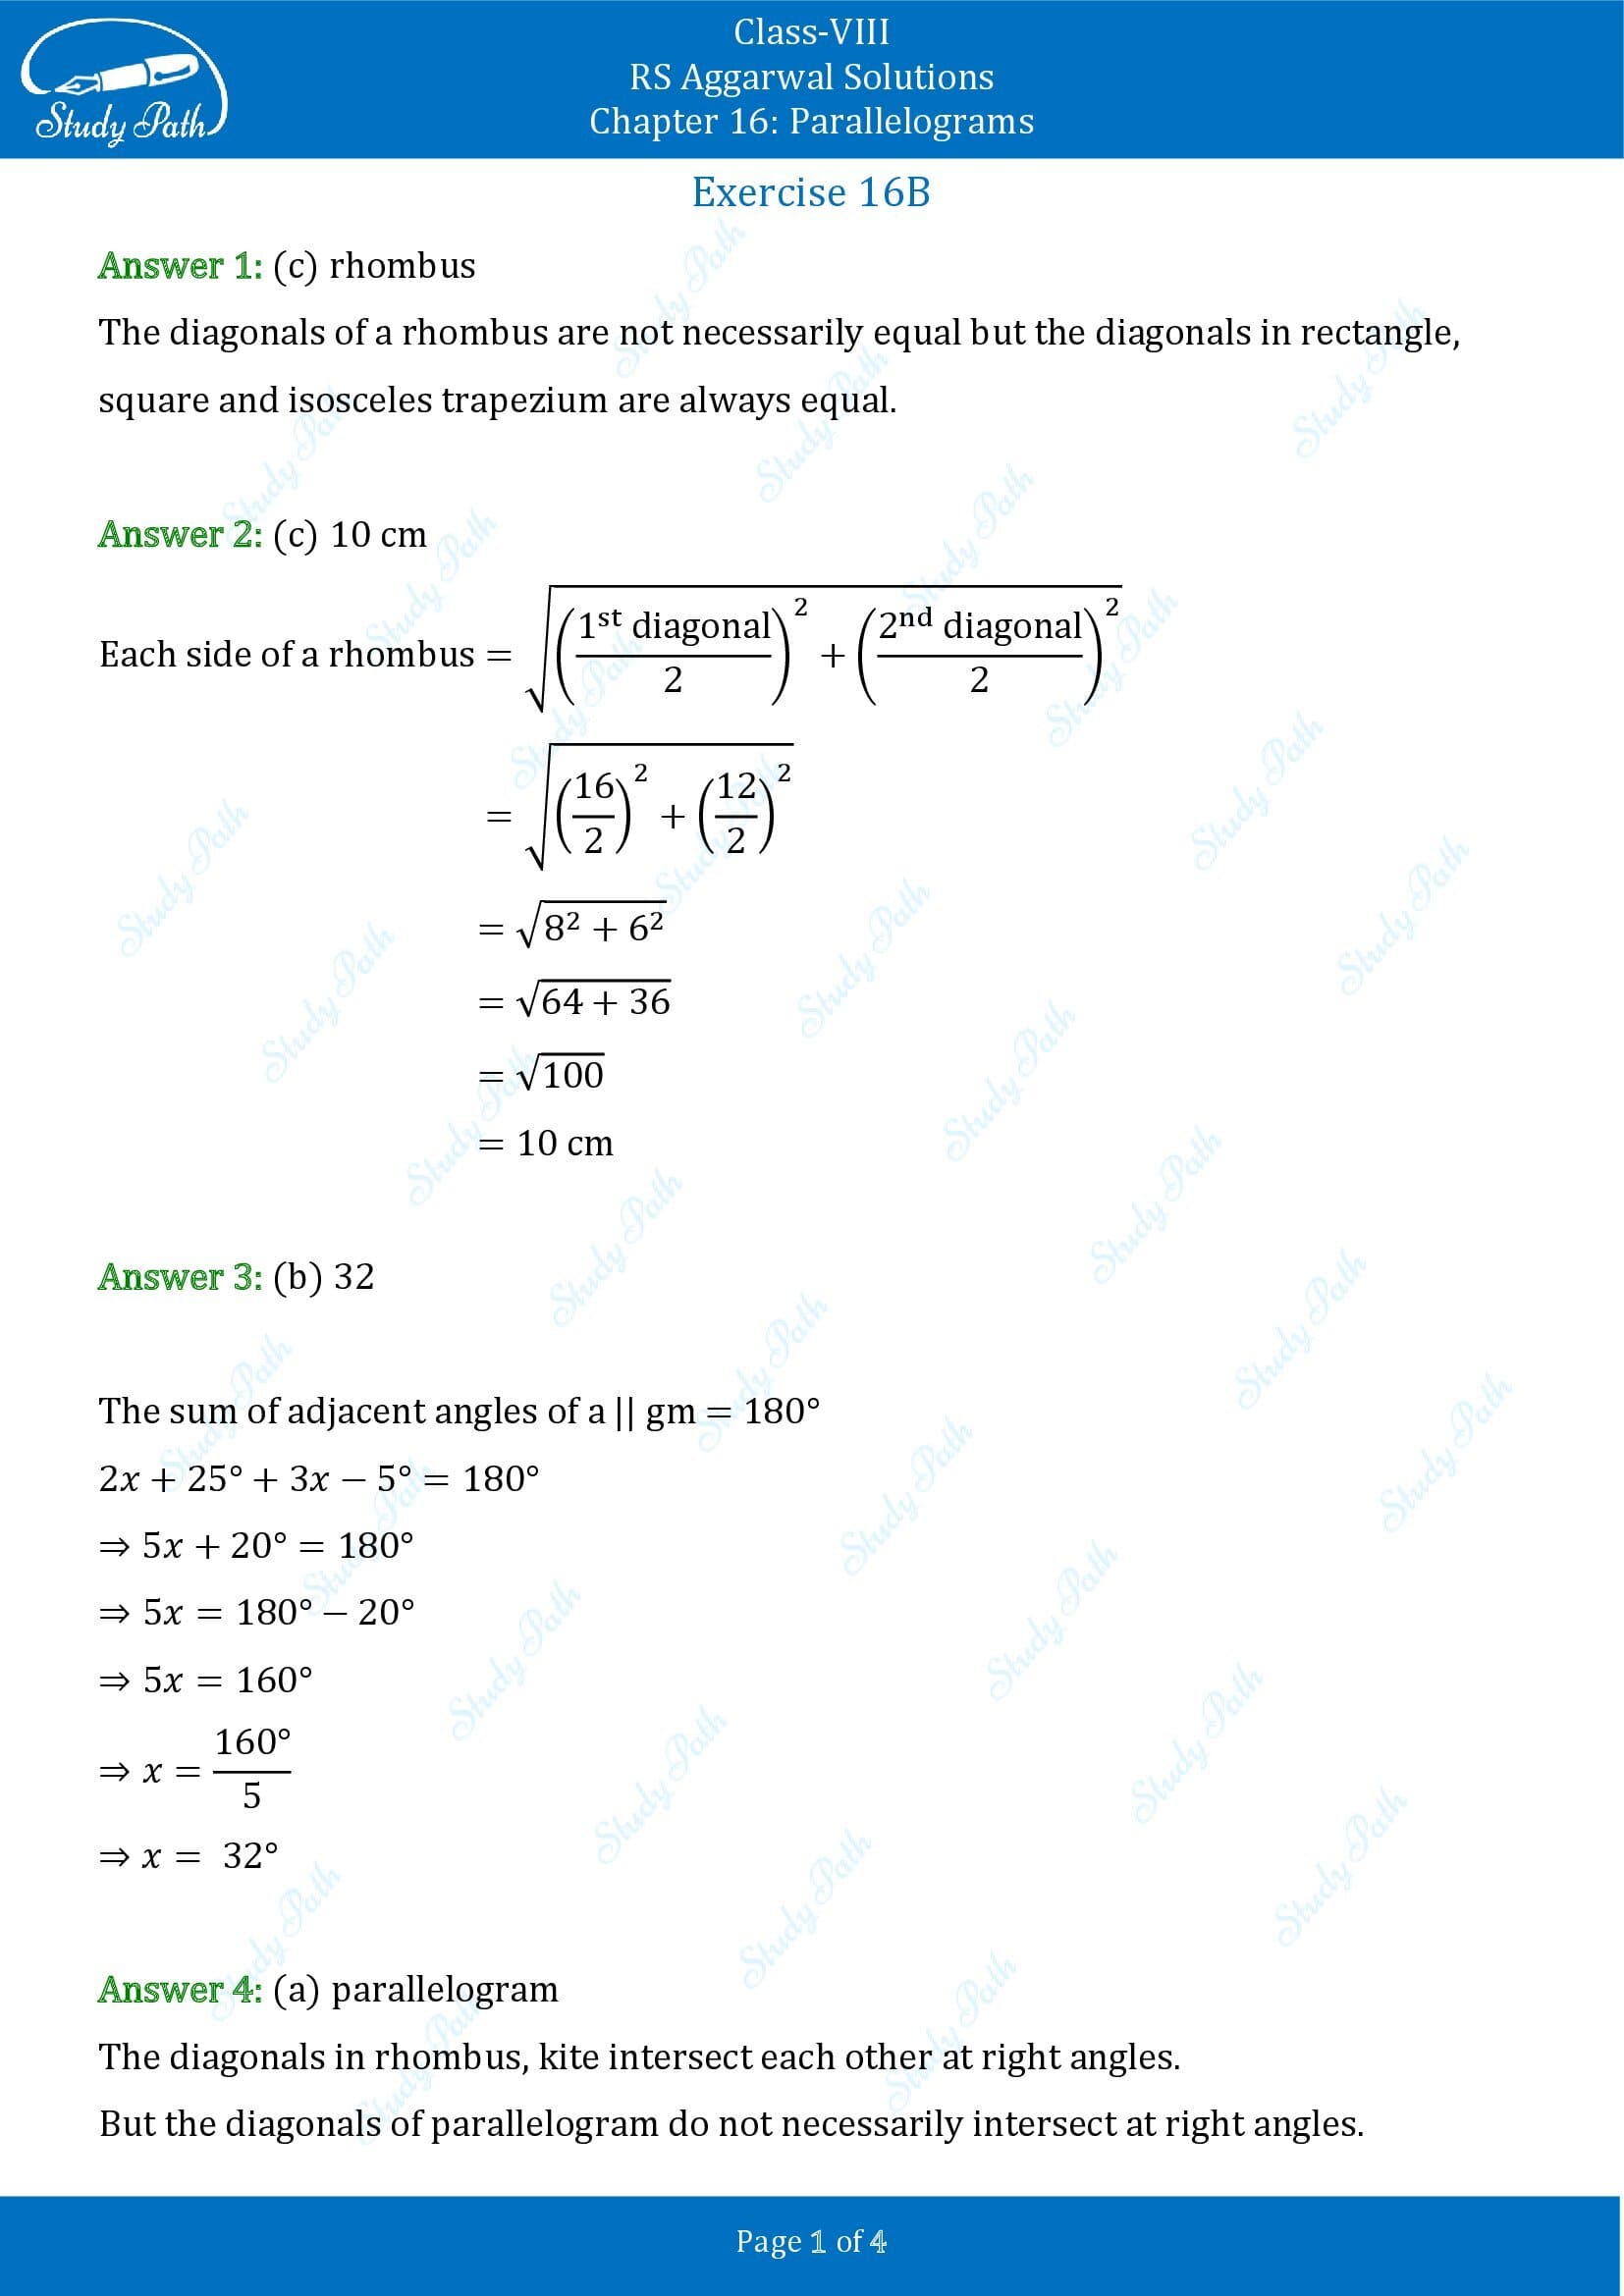 RS Aggarwal Solutions Class 8 Chapter 16 Parallelograms Exercise 16B MCQs 00001